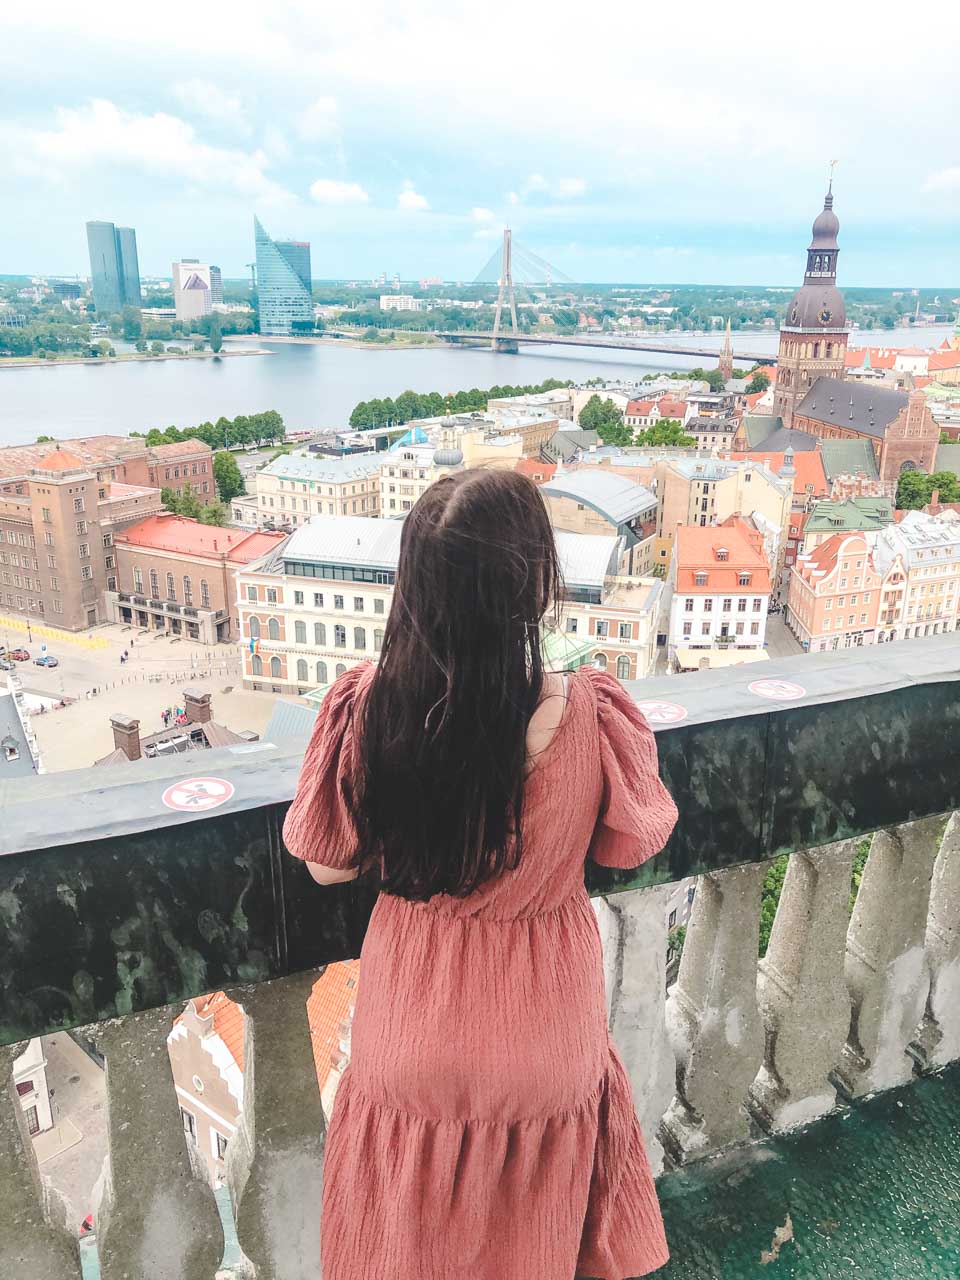 A girl in a pink dress admiring the view from the tower of St. Peter's Church